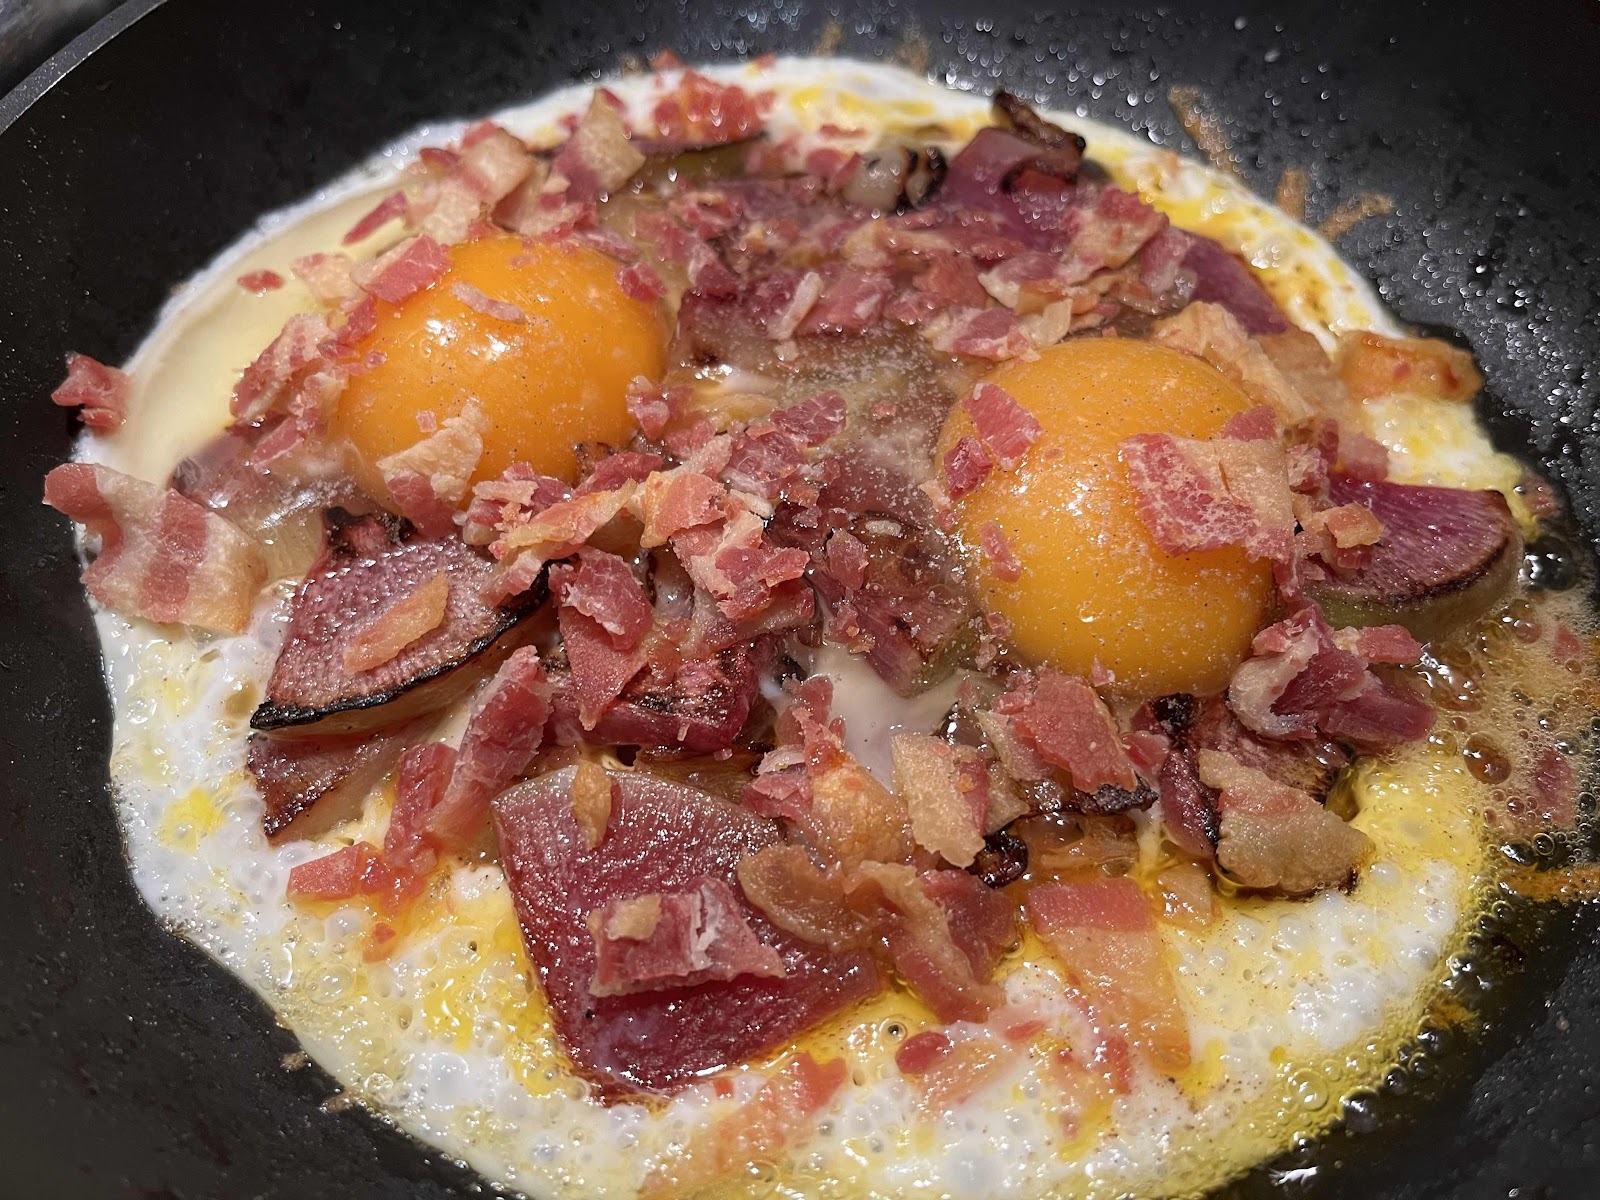 Add eggs and bacon